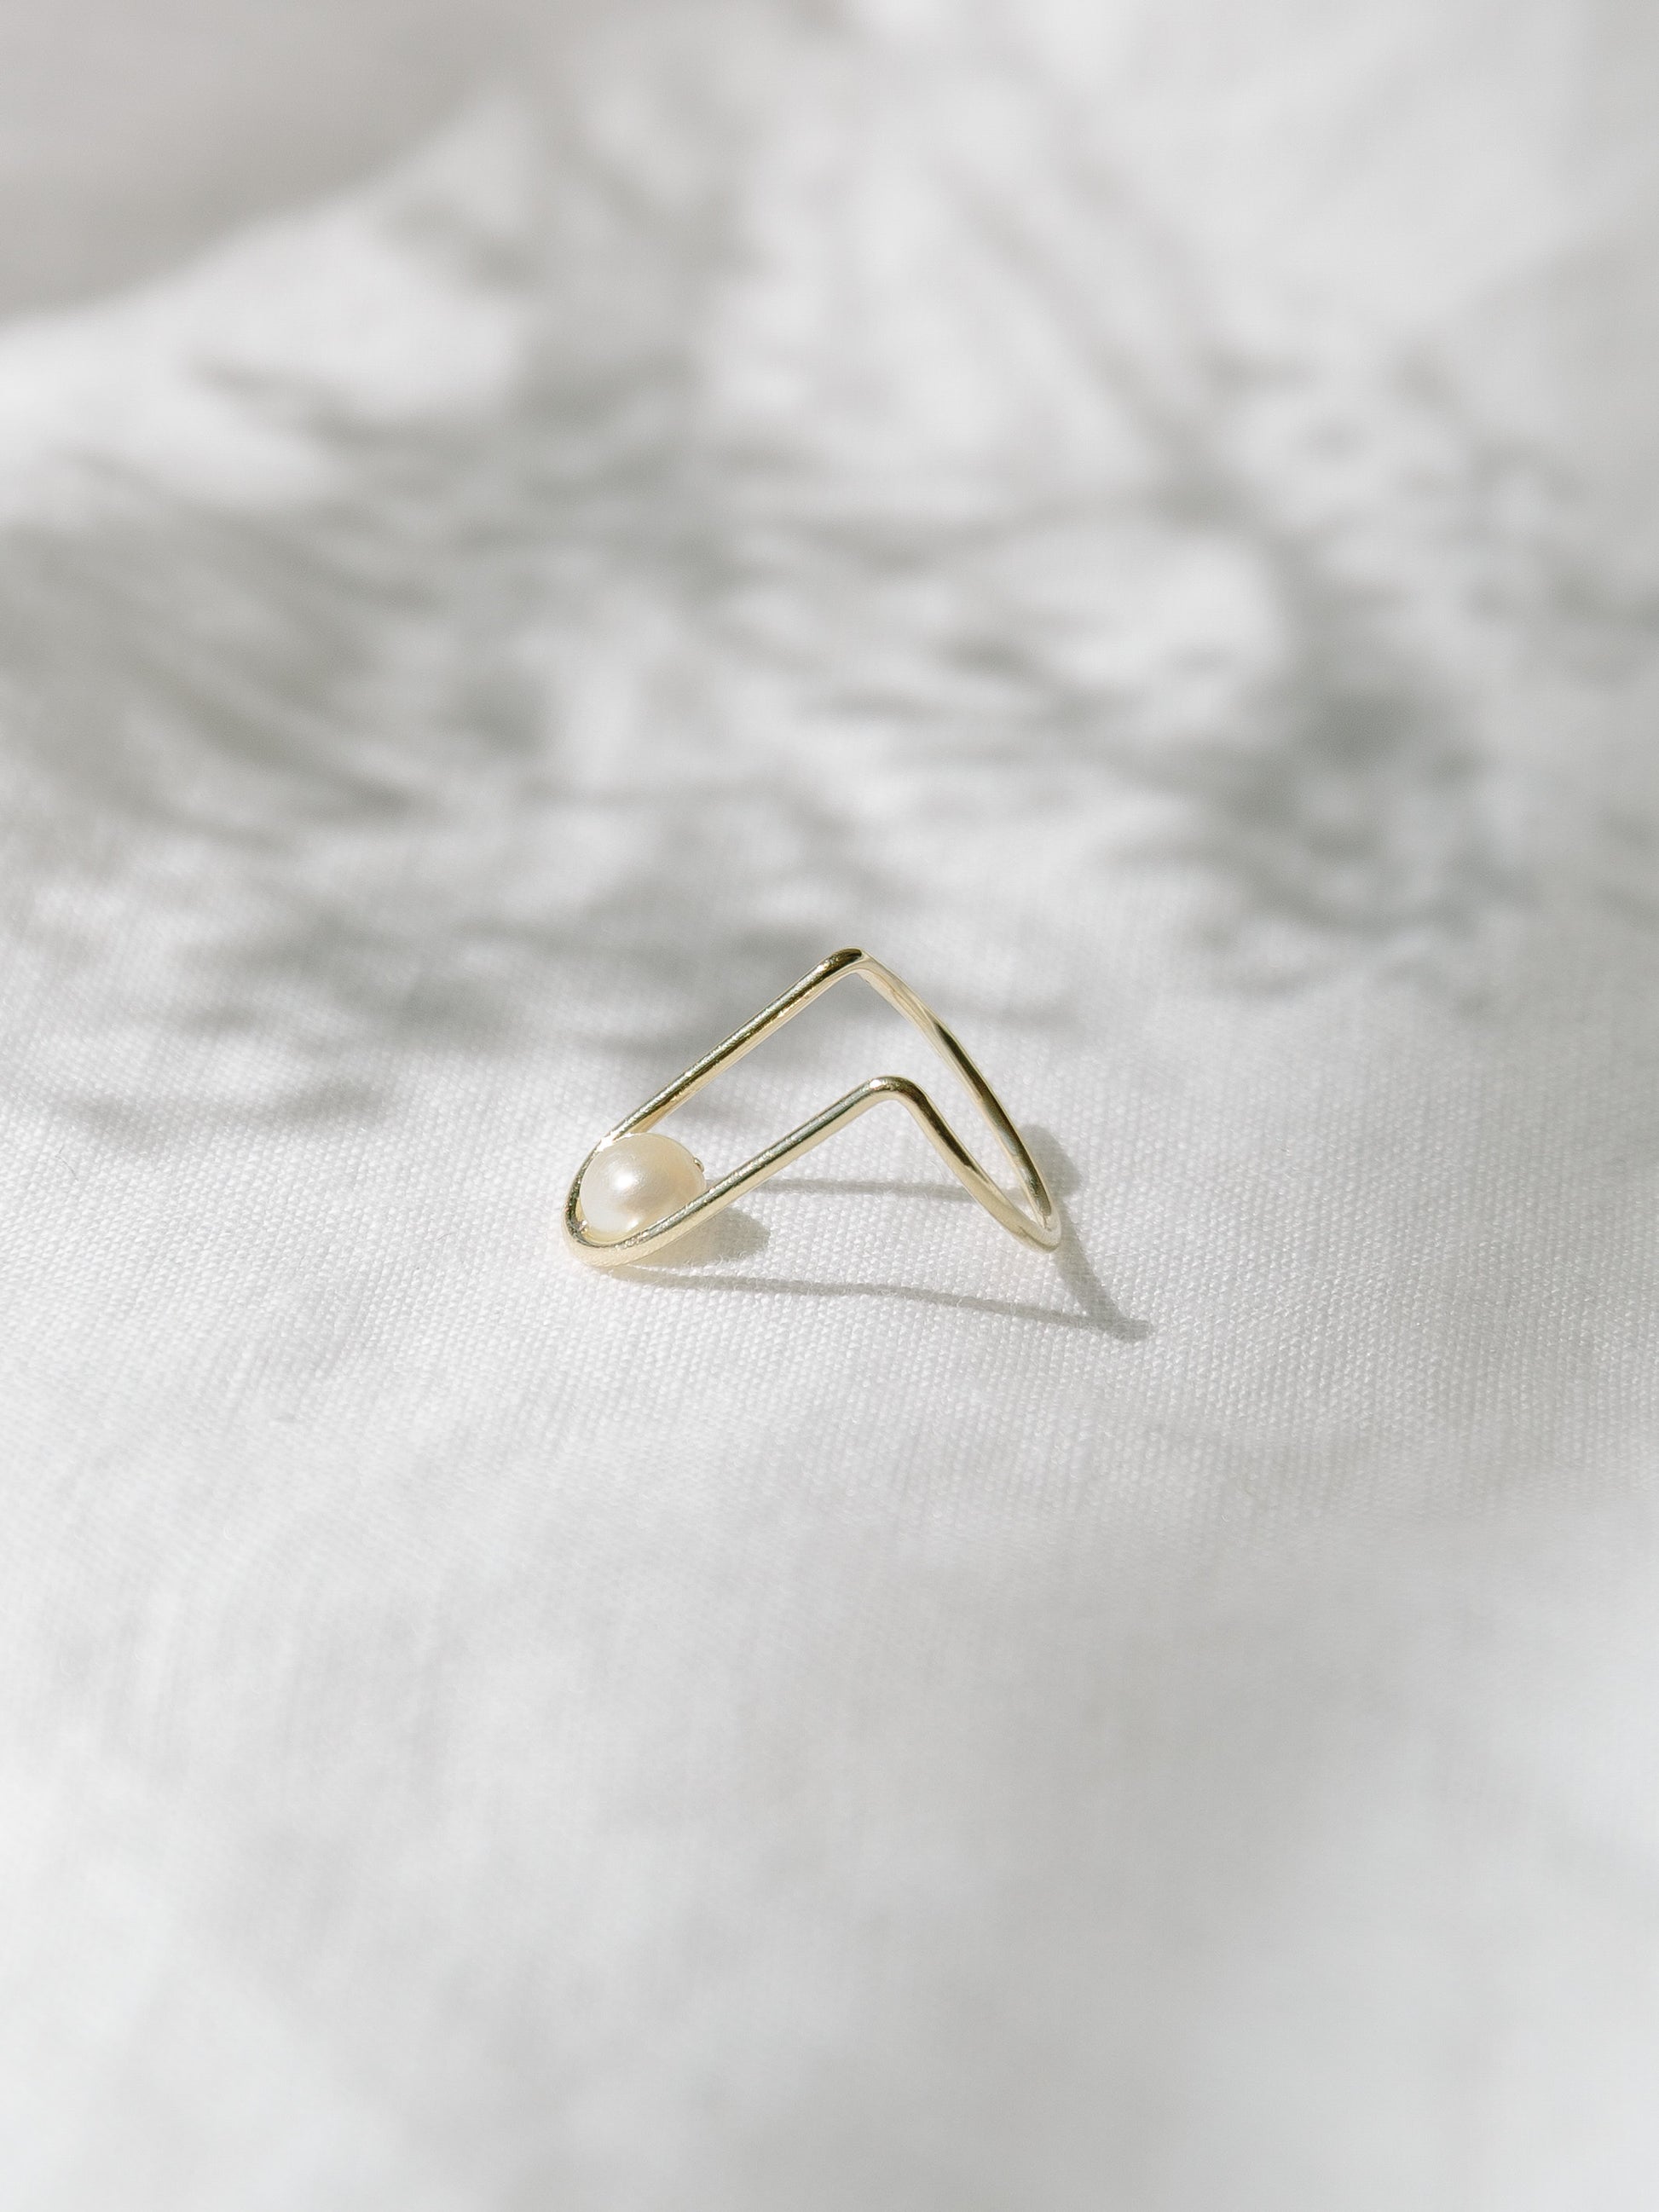 Doublemoss Jewelry 14k Gold La Perla Ring with Freshwater Pearl. Wear it as nail art or a regular ring.